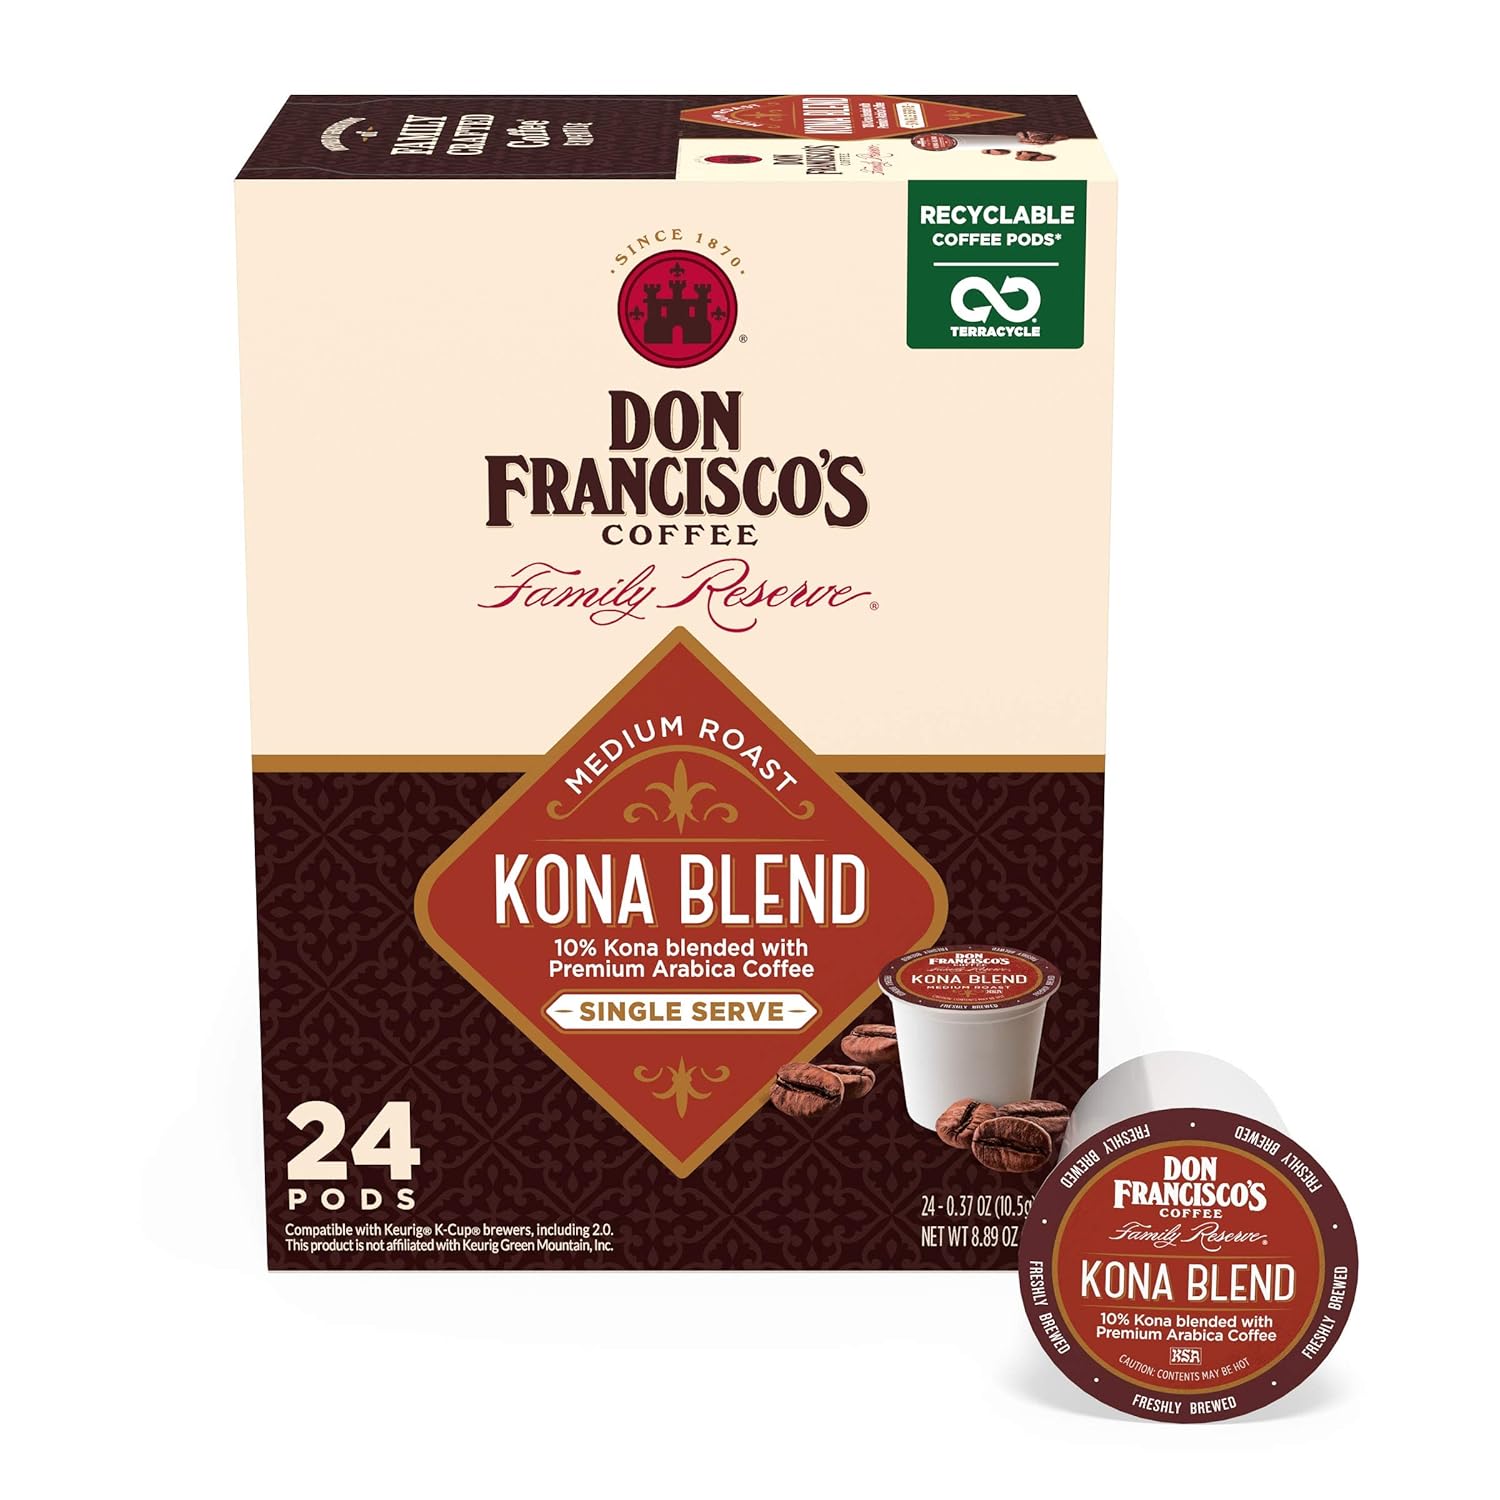 If you are like me and enjoy flavored coffee but need to limit your caffeine, this is a good decaf coffee to go with. I tried the more expensive flavored decaf coffee made by the big 